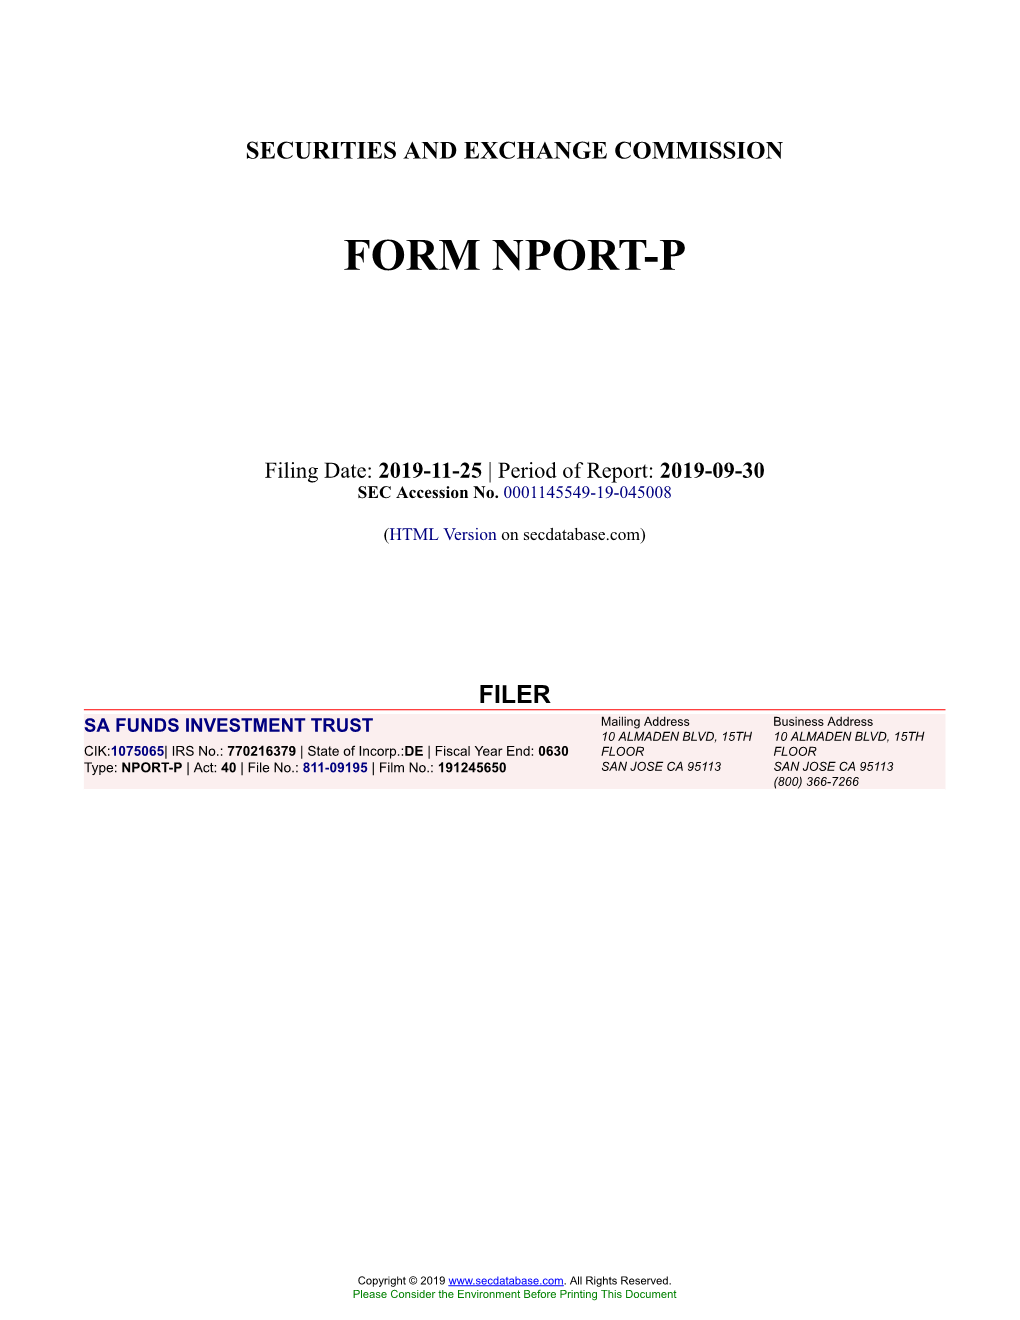 SA FUNDS INVESTMENT TRUST Form NPORT-P Filed 2019-11-25